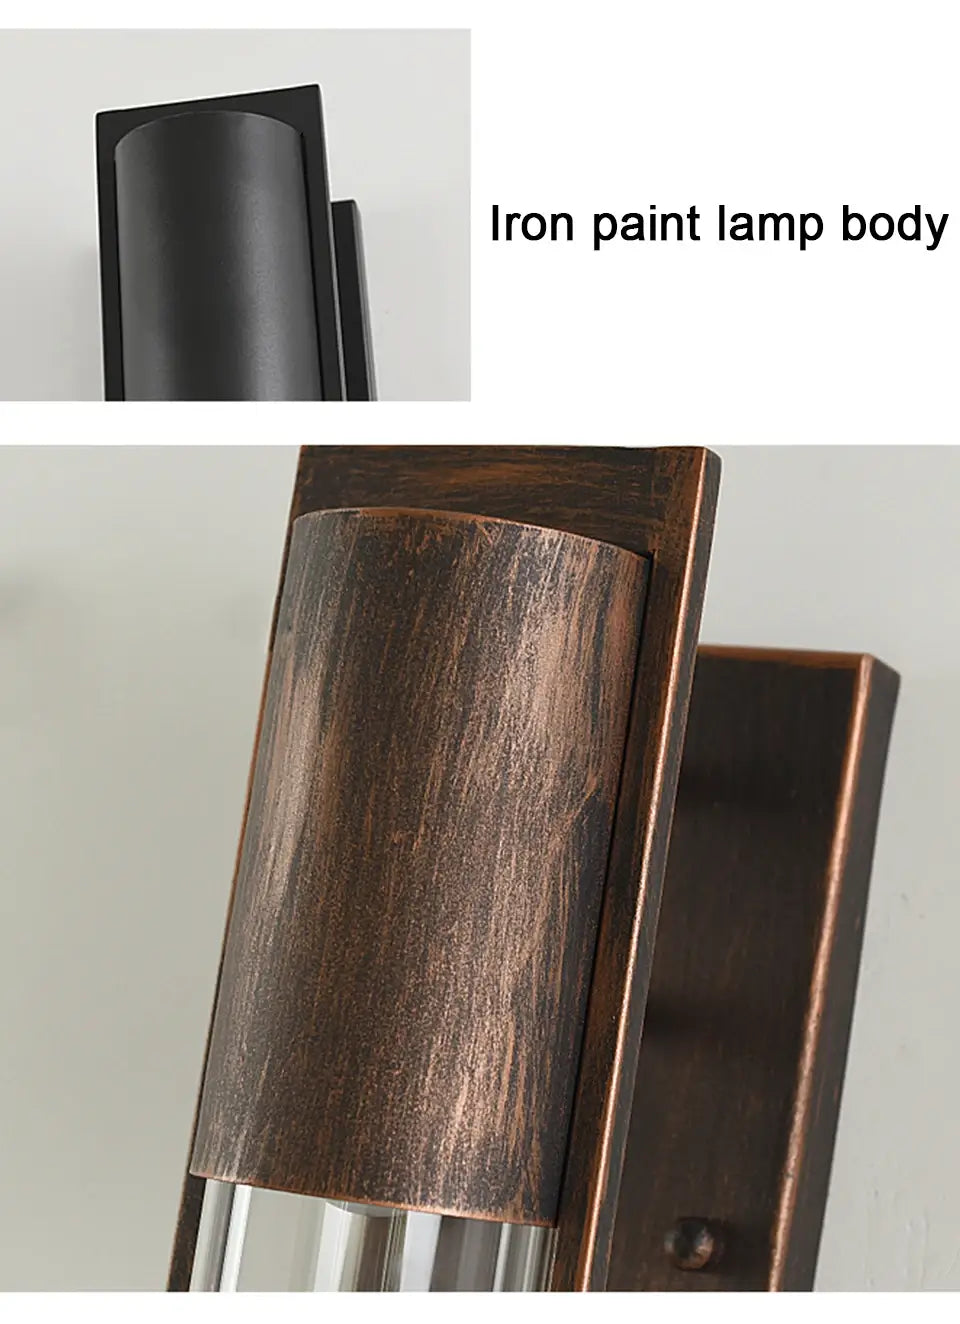 Vintage Black/Bronze Outdoor Waterproof Led Wall Sconce for Porch